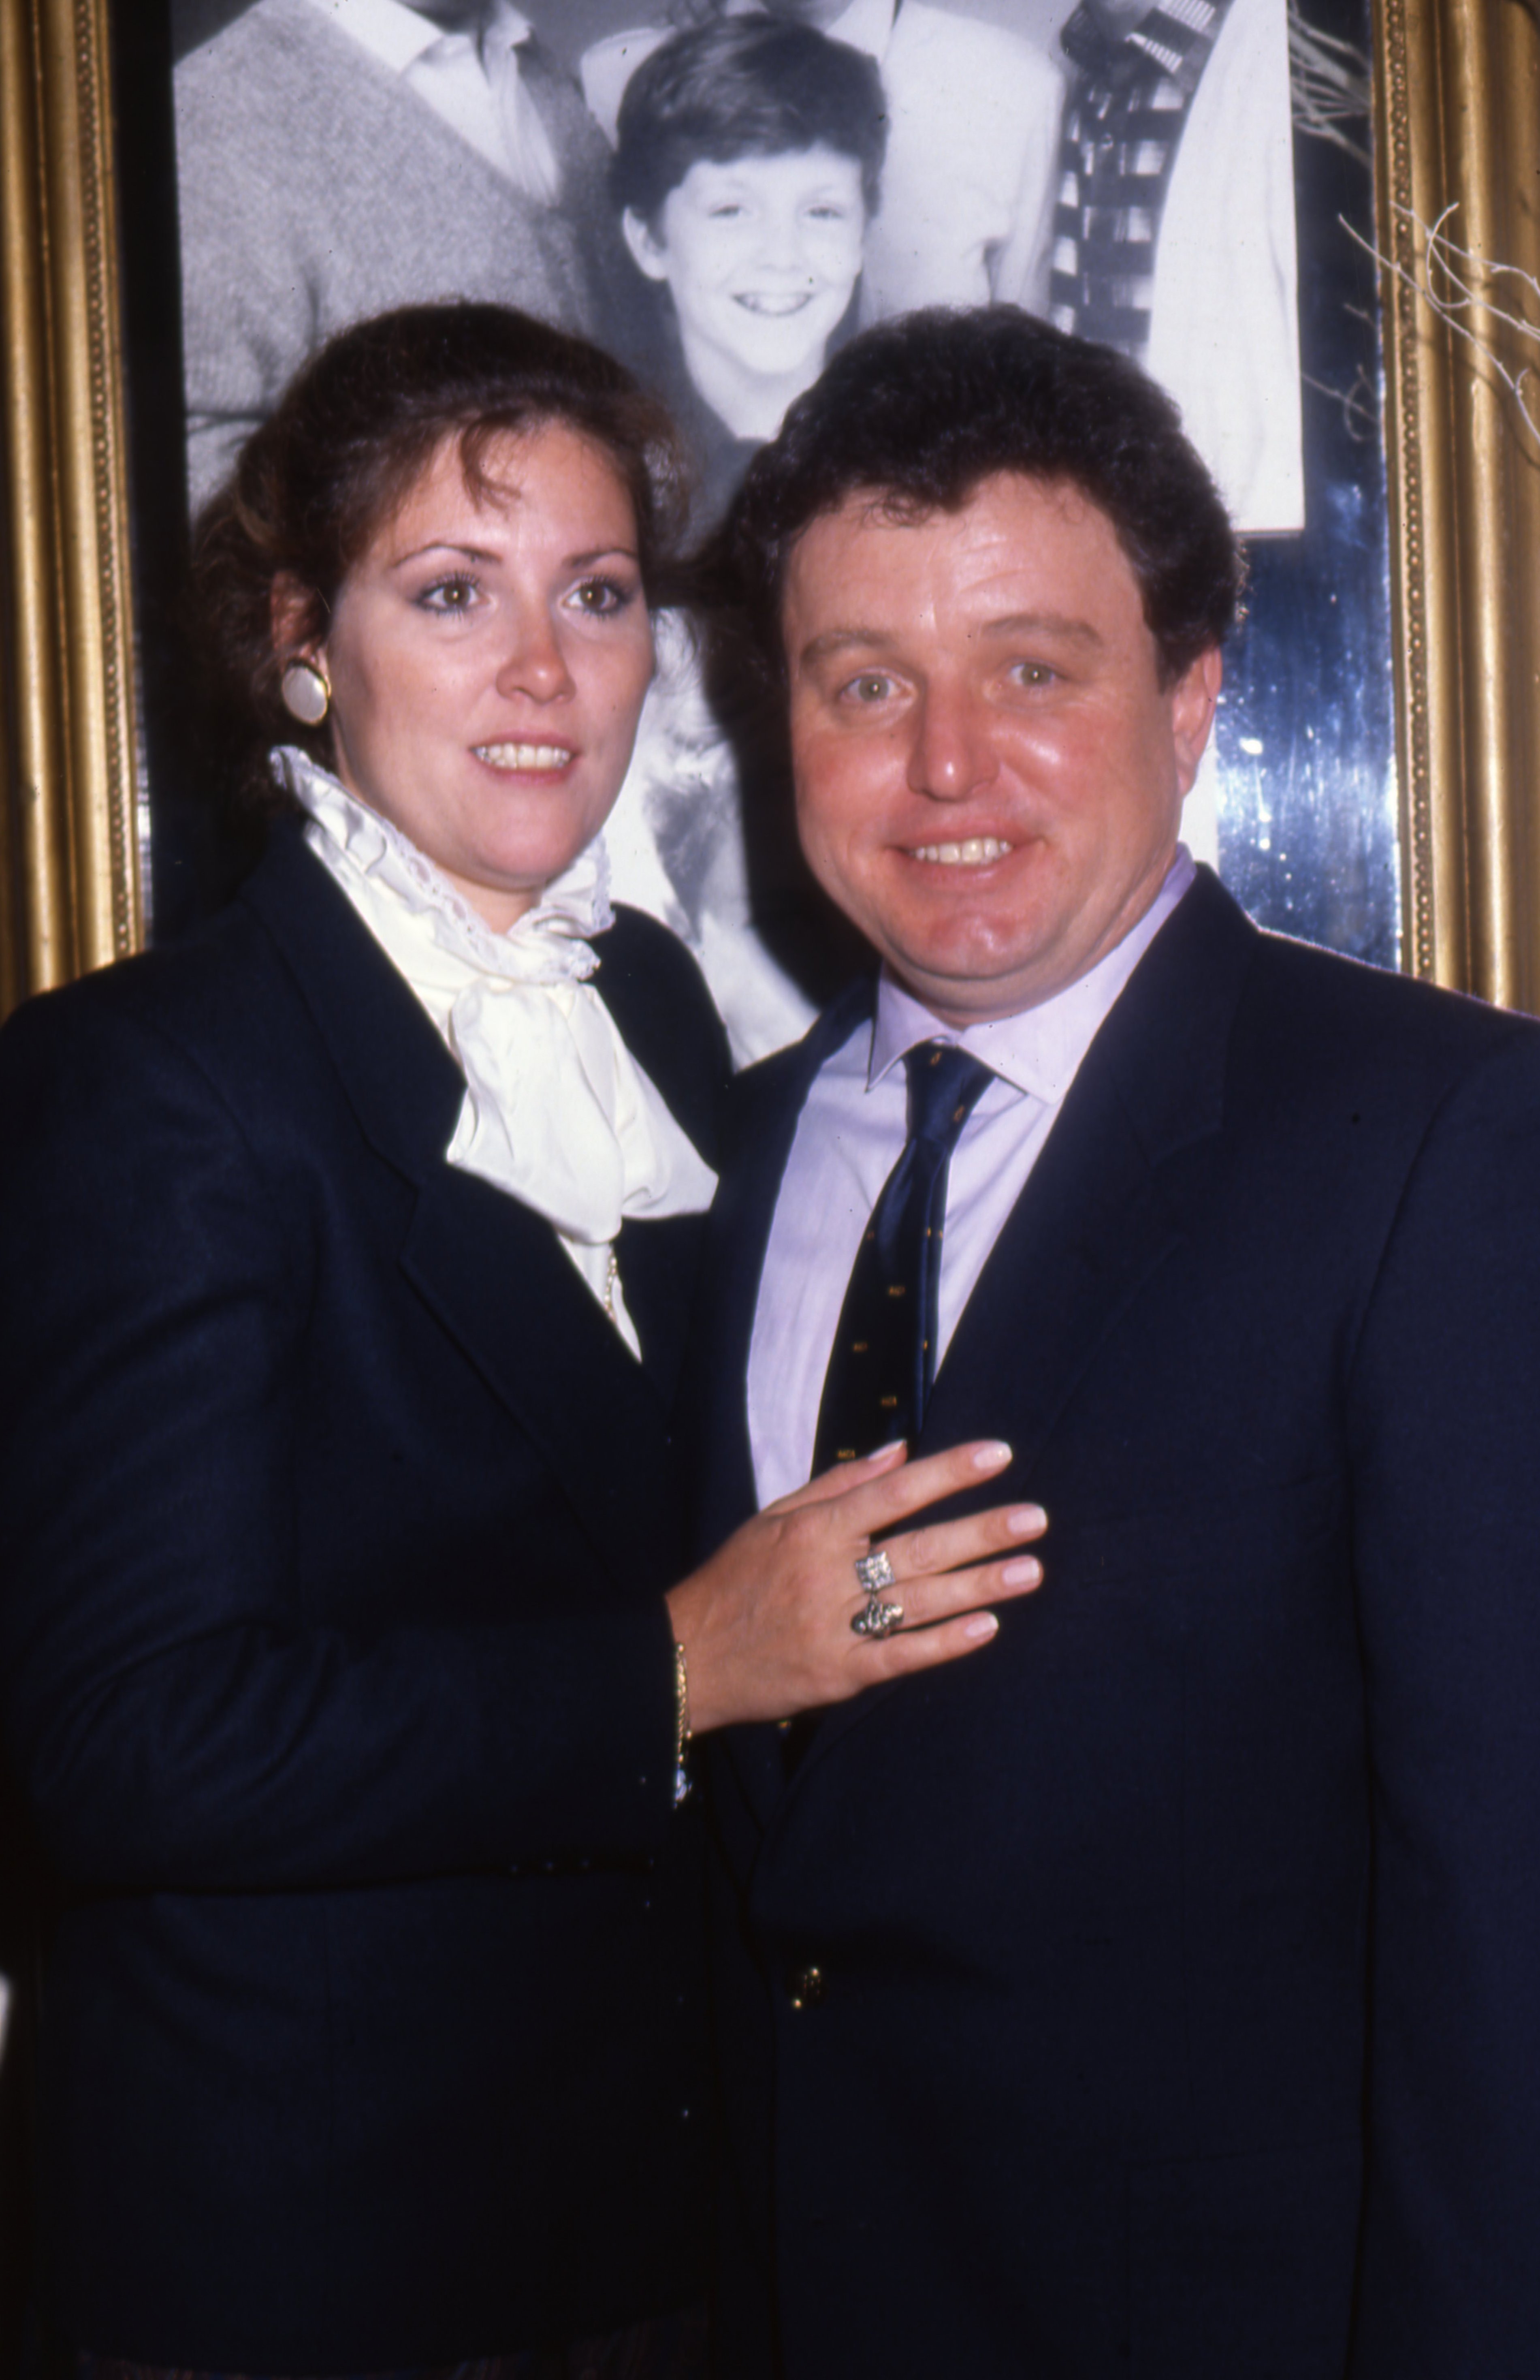 Actor Jerry Mathers and his wife Rhonda Mathers attend an event in 1986 in Los Angeles, California | Source: Getty Images 